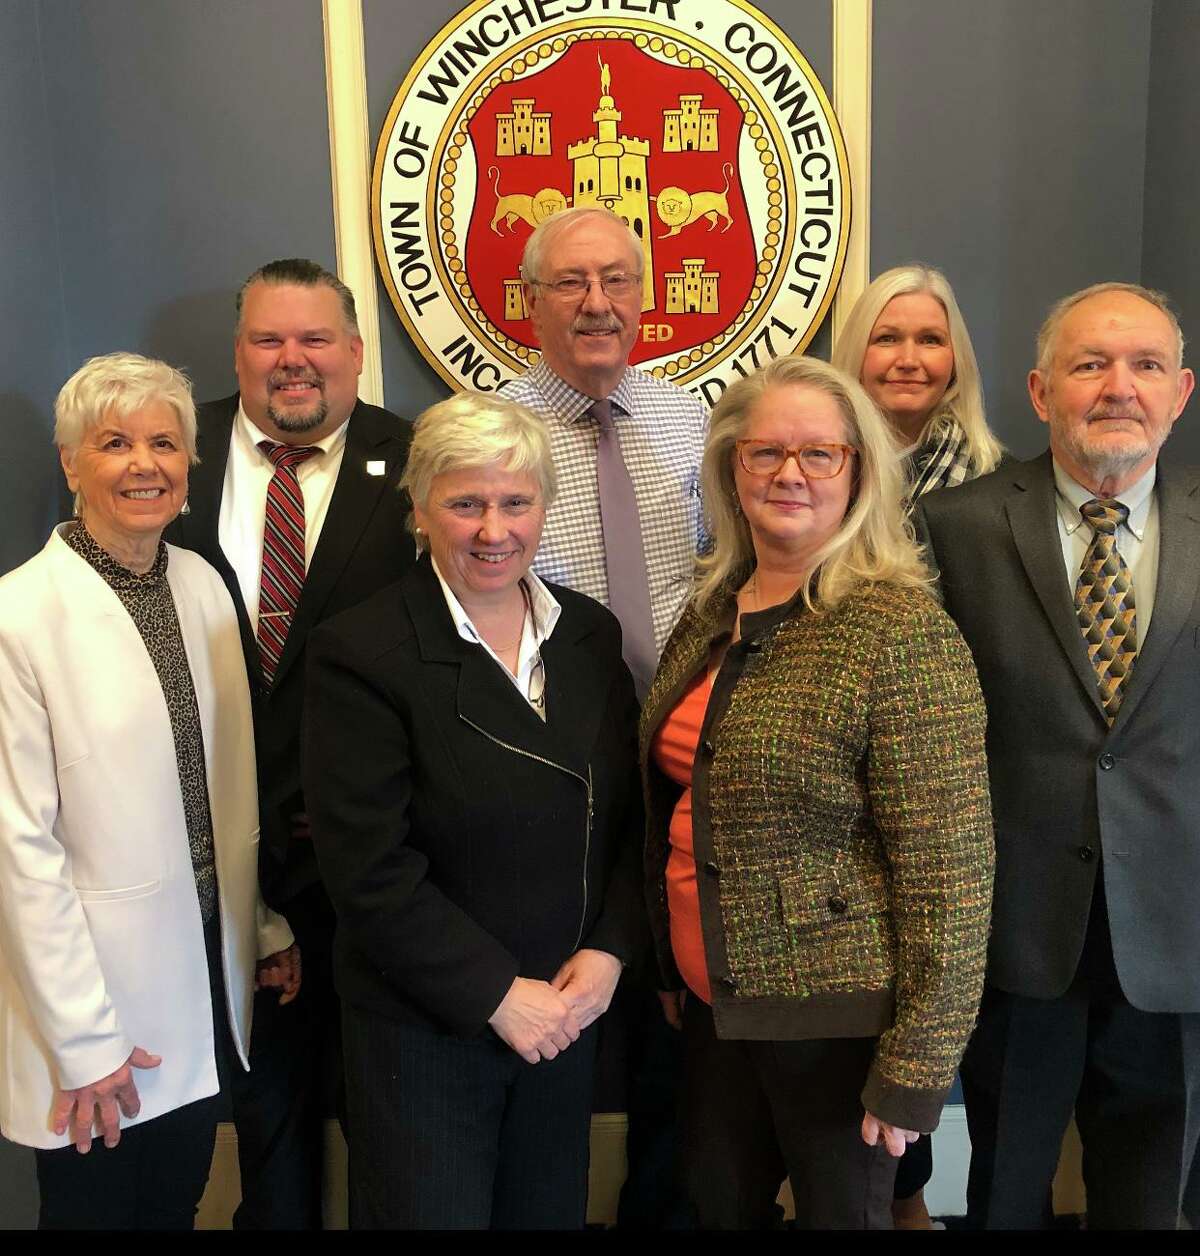 Elected officials in Winsted announced on Feb. 9 the hiring of a new town manager.